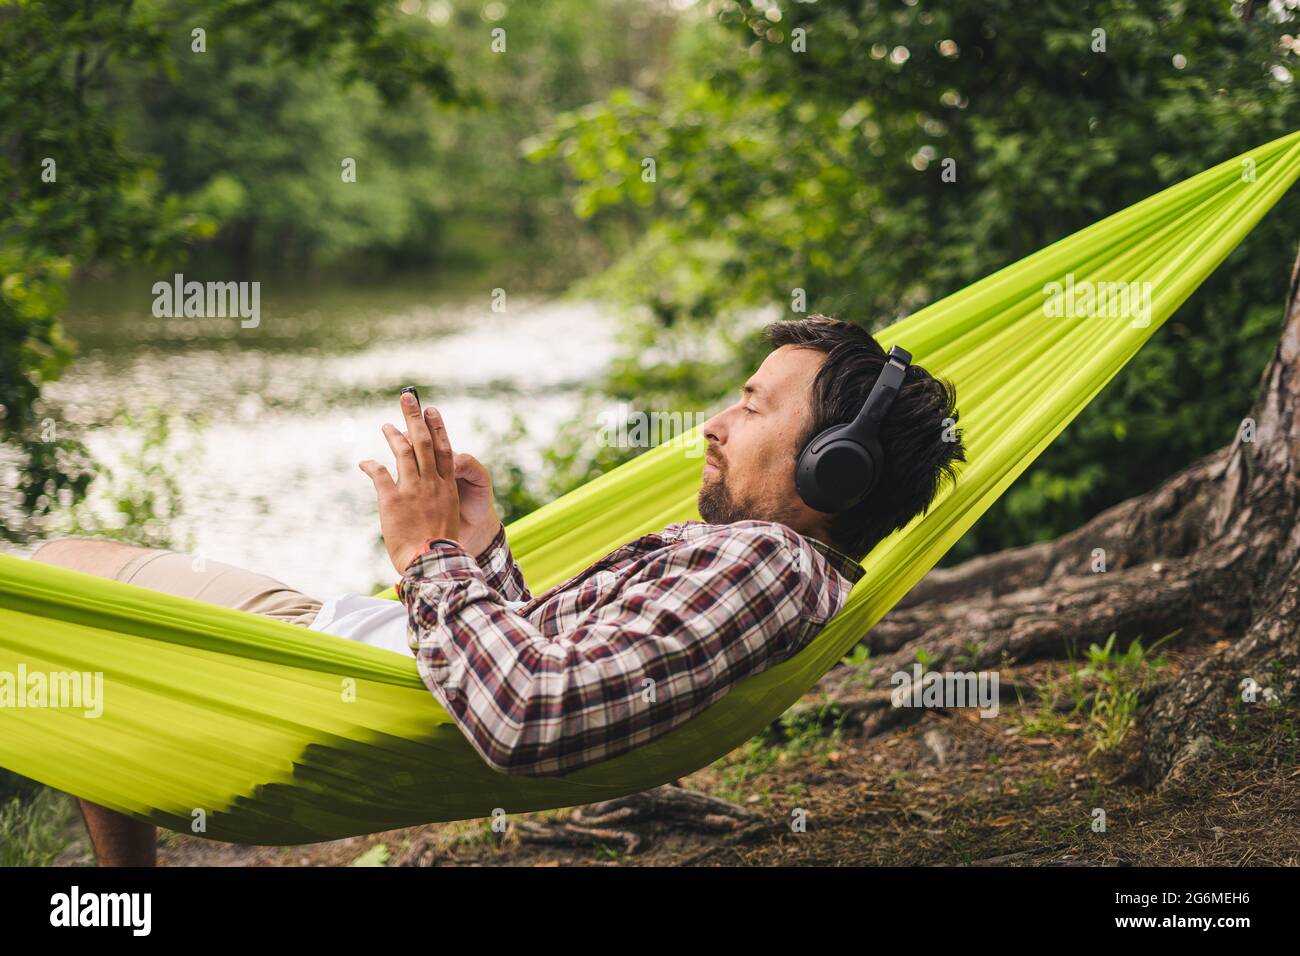 Man on bicycle trip at camping by lake is relaxing in green hammock while listening to music. Active recreation theme in nature. Hipster cyclist with Stock Photo